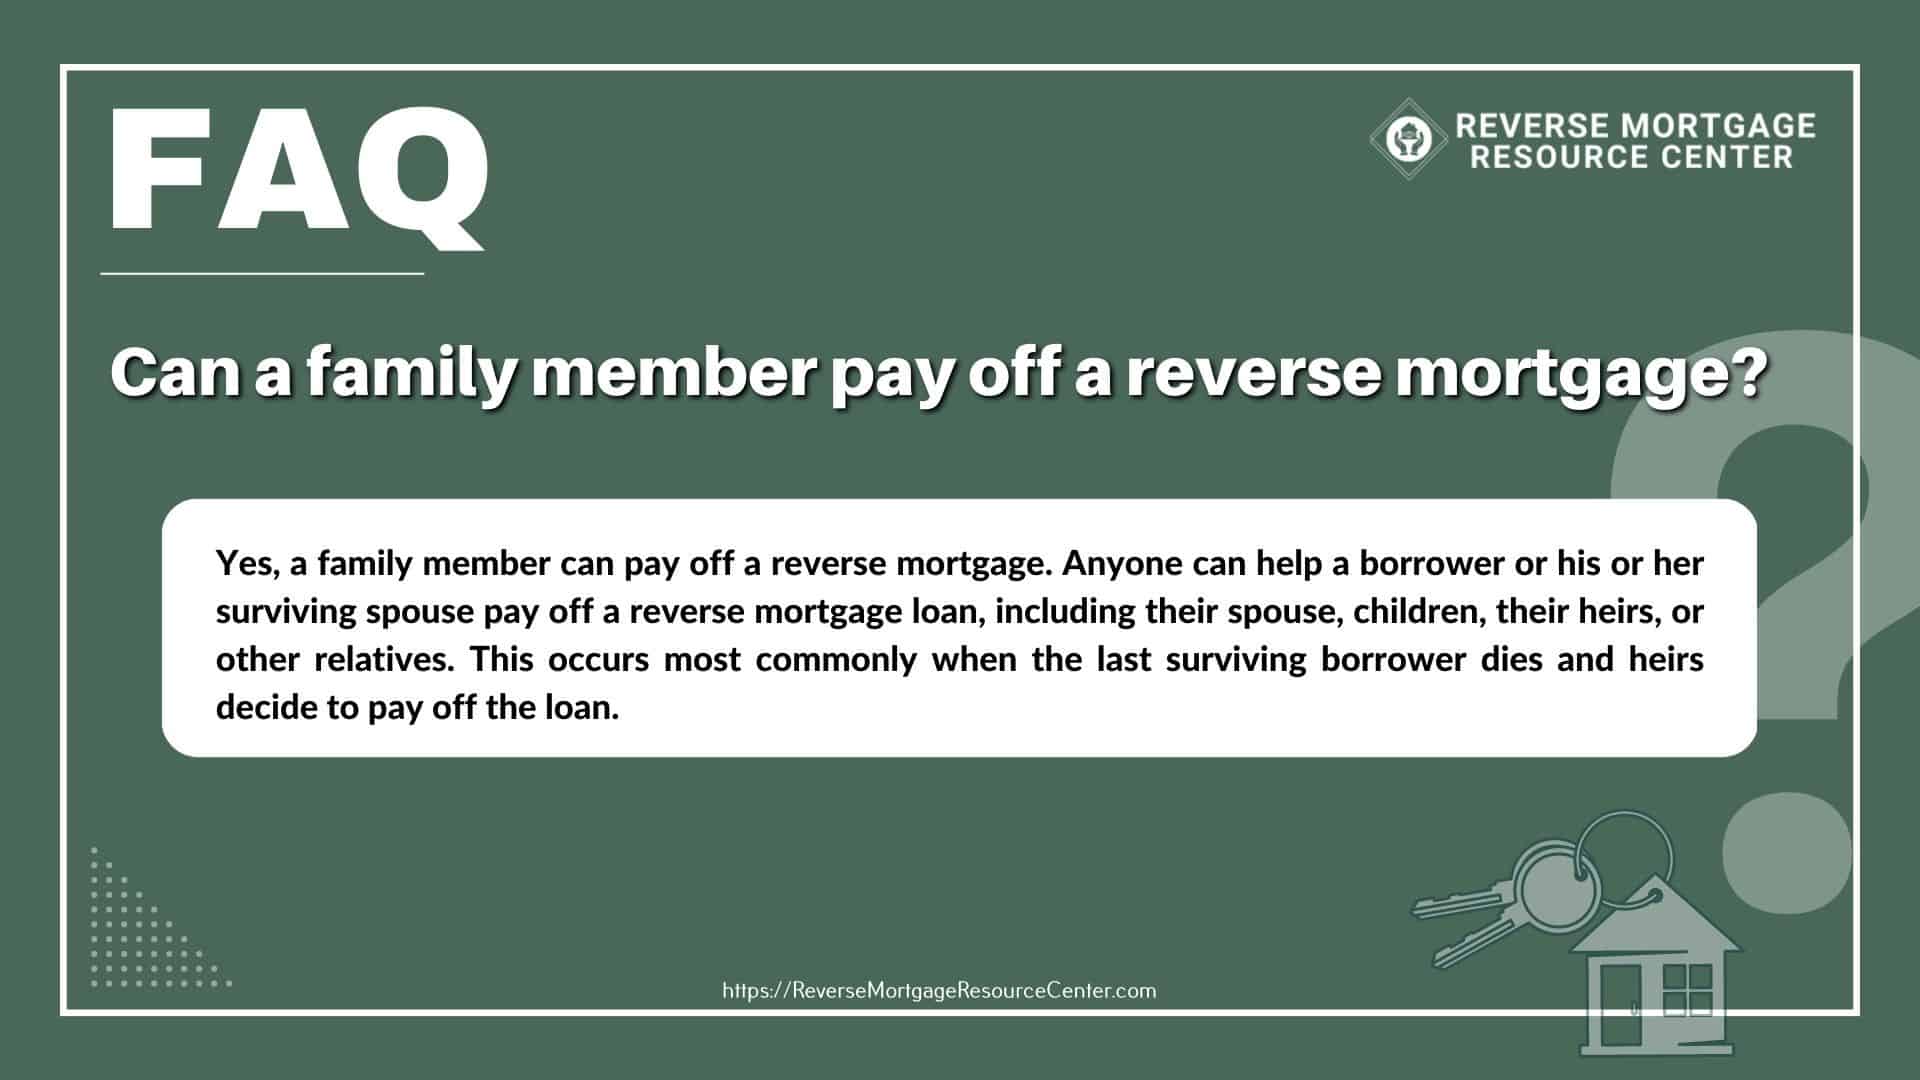 Can a family member pay off a reverse mortgage?